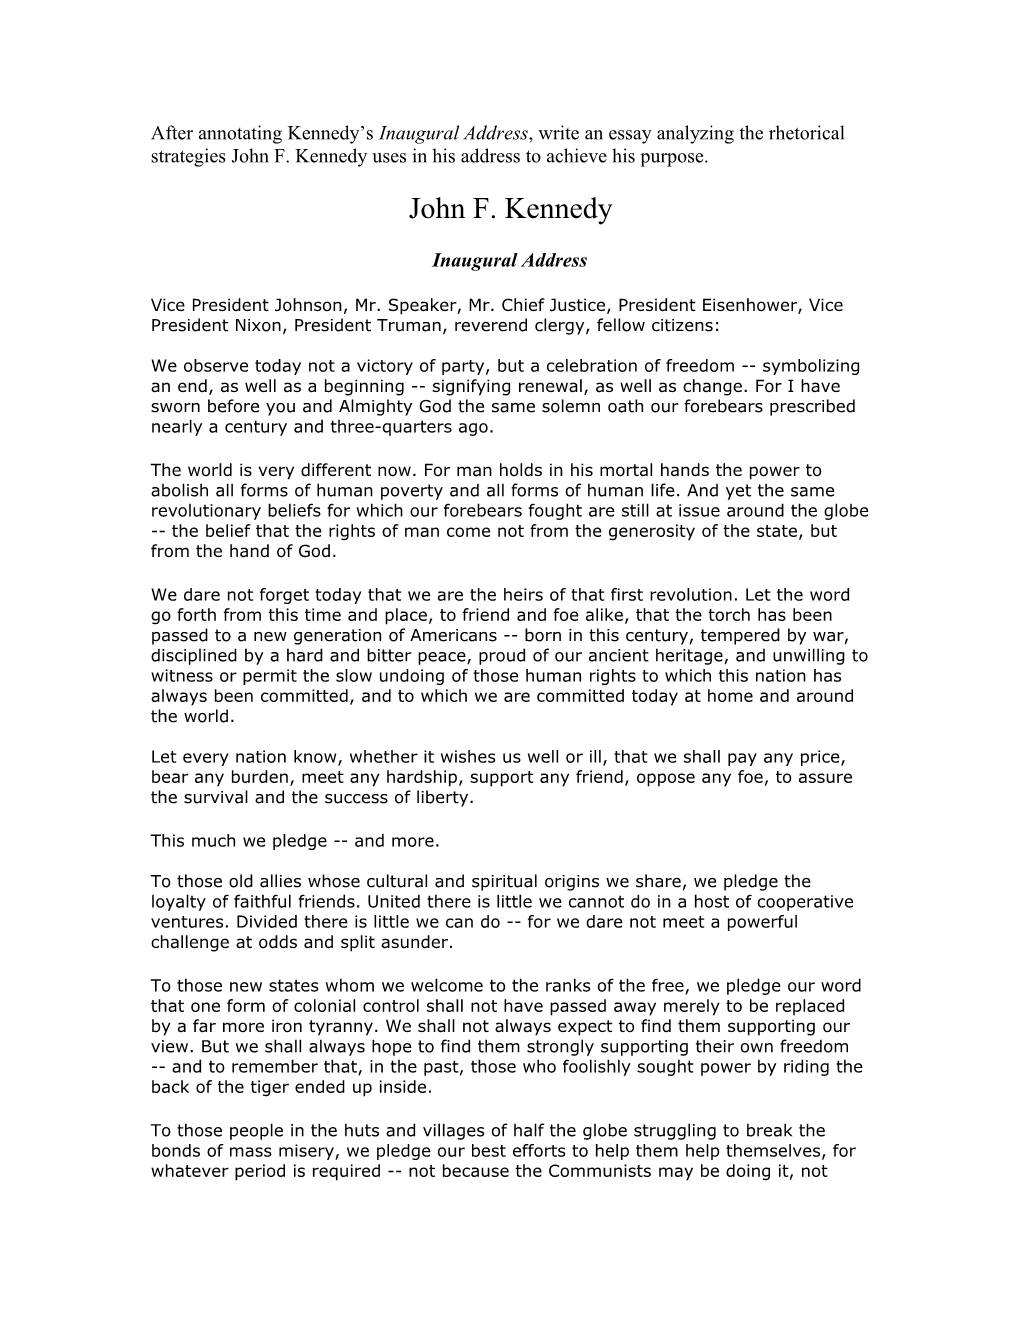 After Annotating Kennedy S Inaugural Address, Write an Essay Analyzing the Rhetorical Strategies